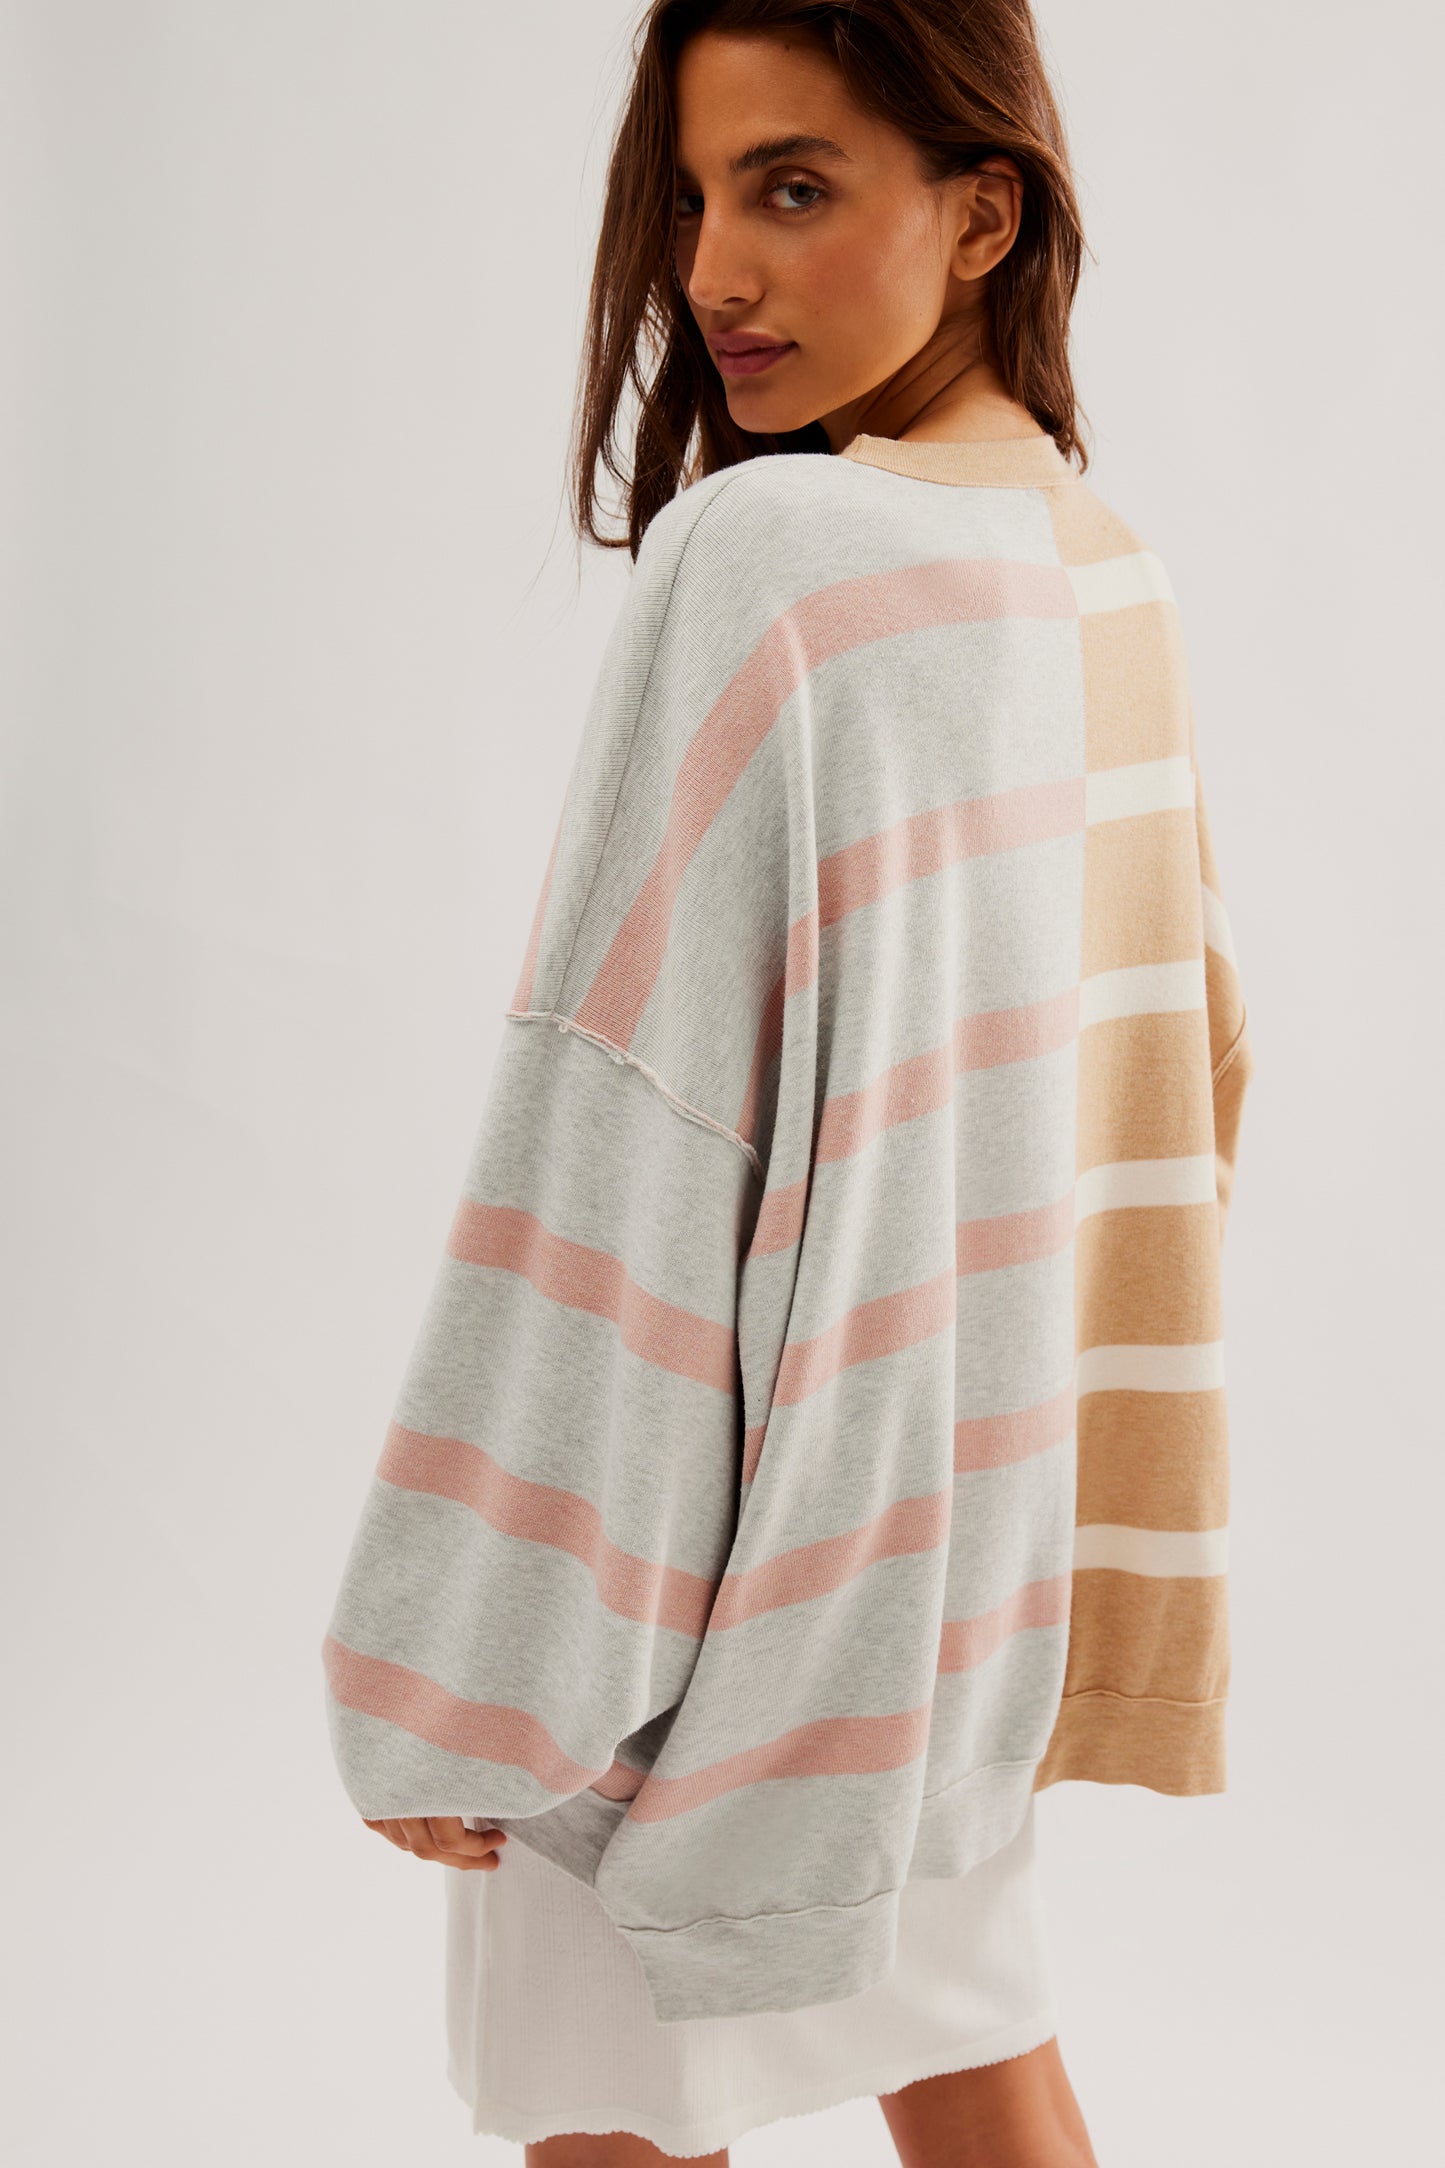 Free People Uptown Stripe Pullover - Camel Grey Combo